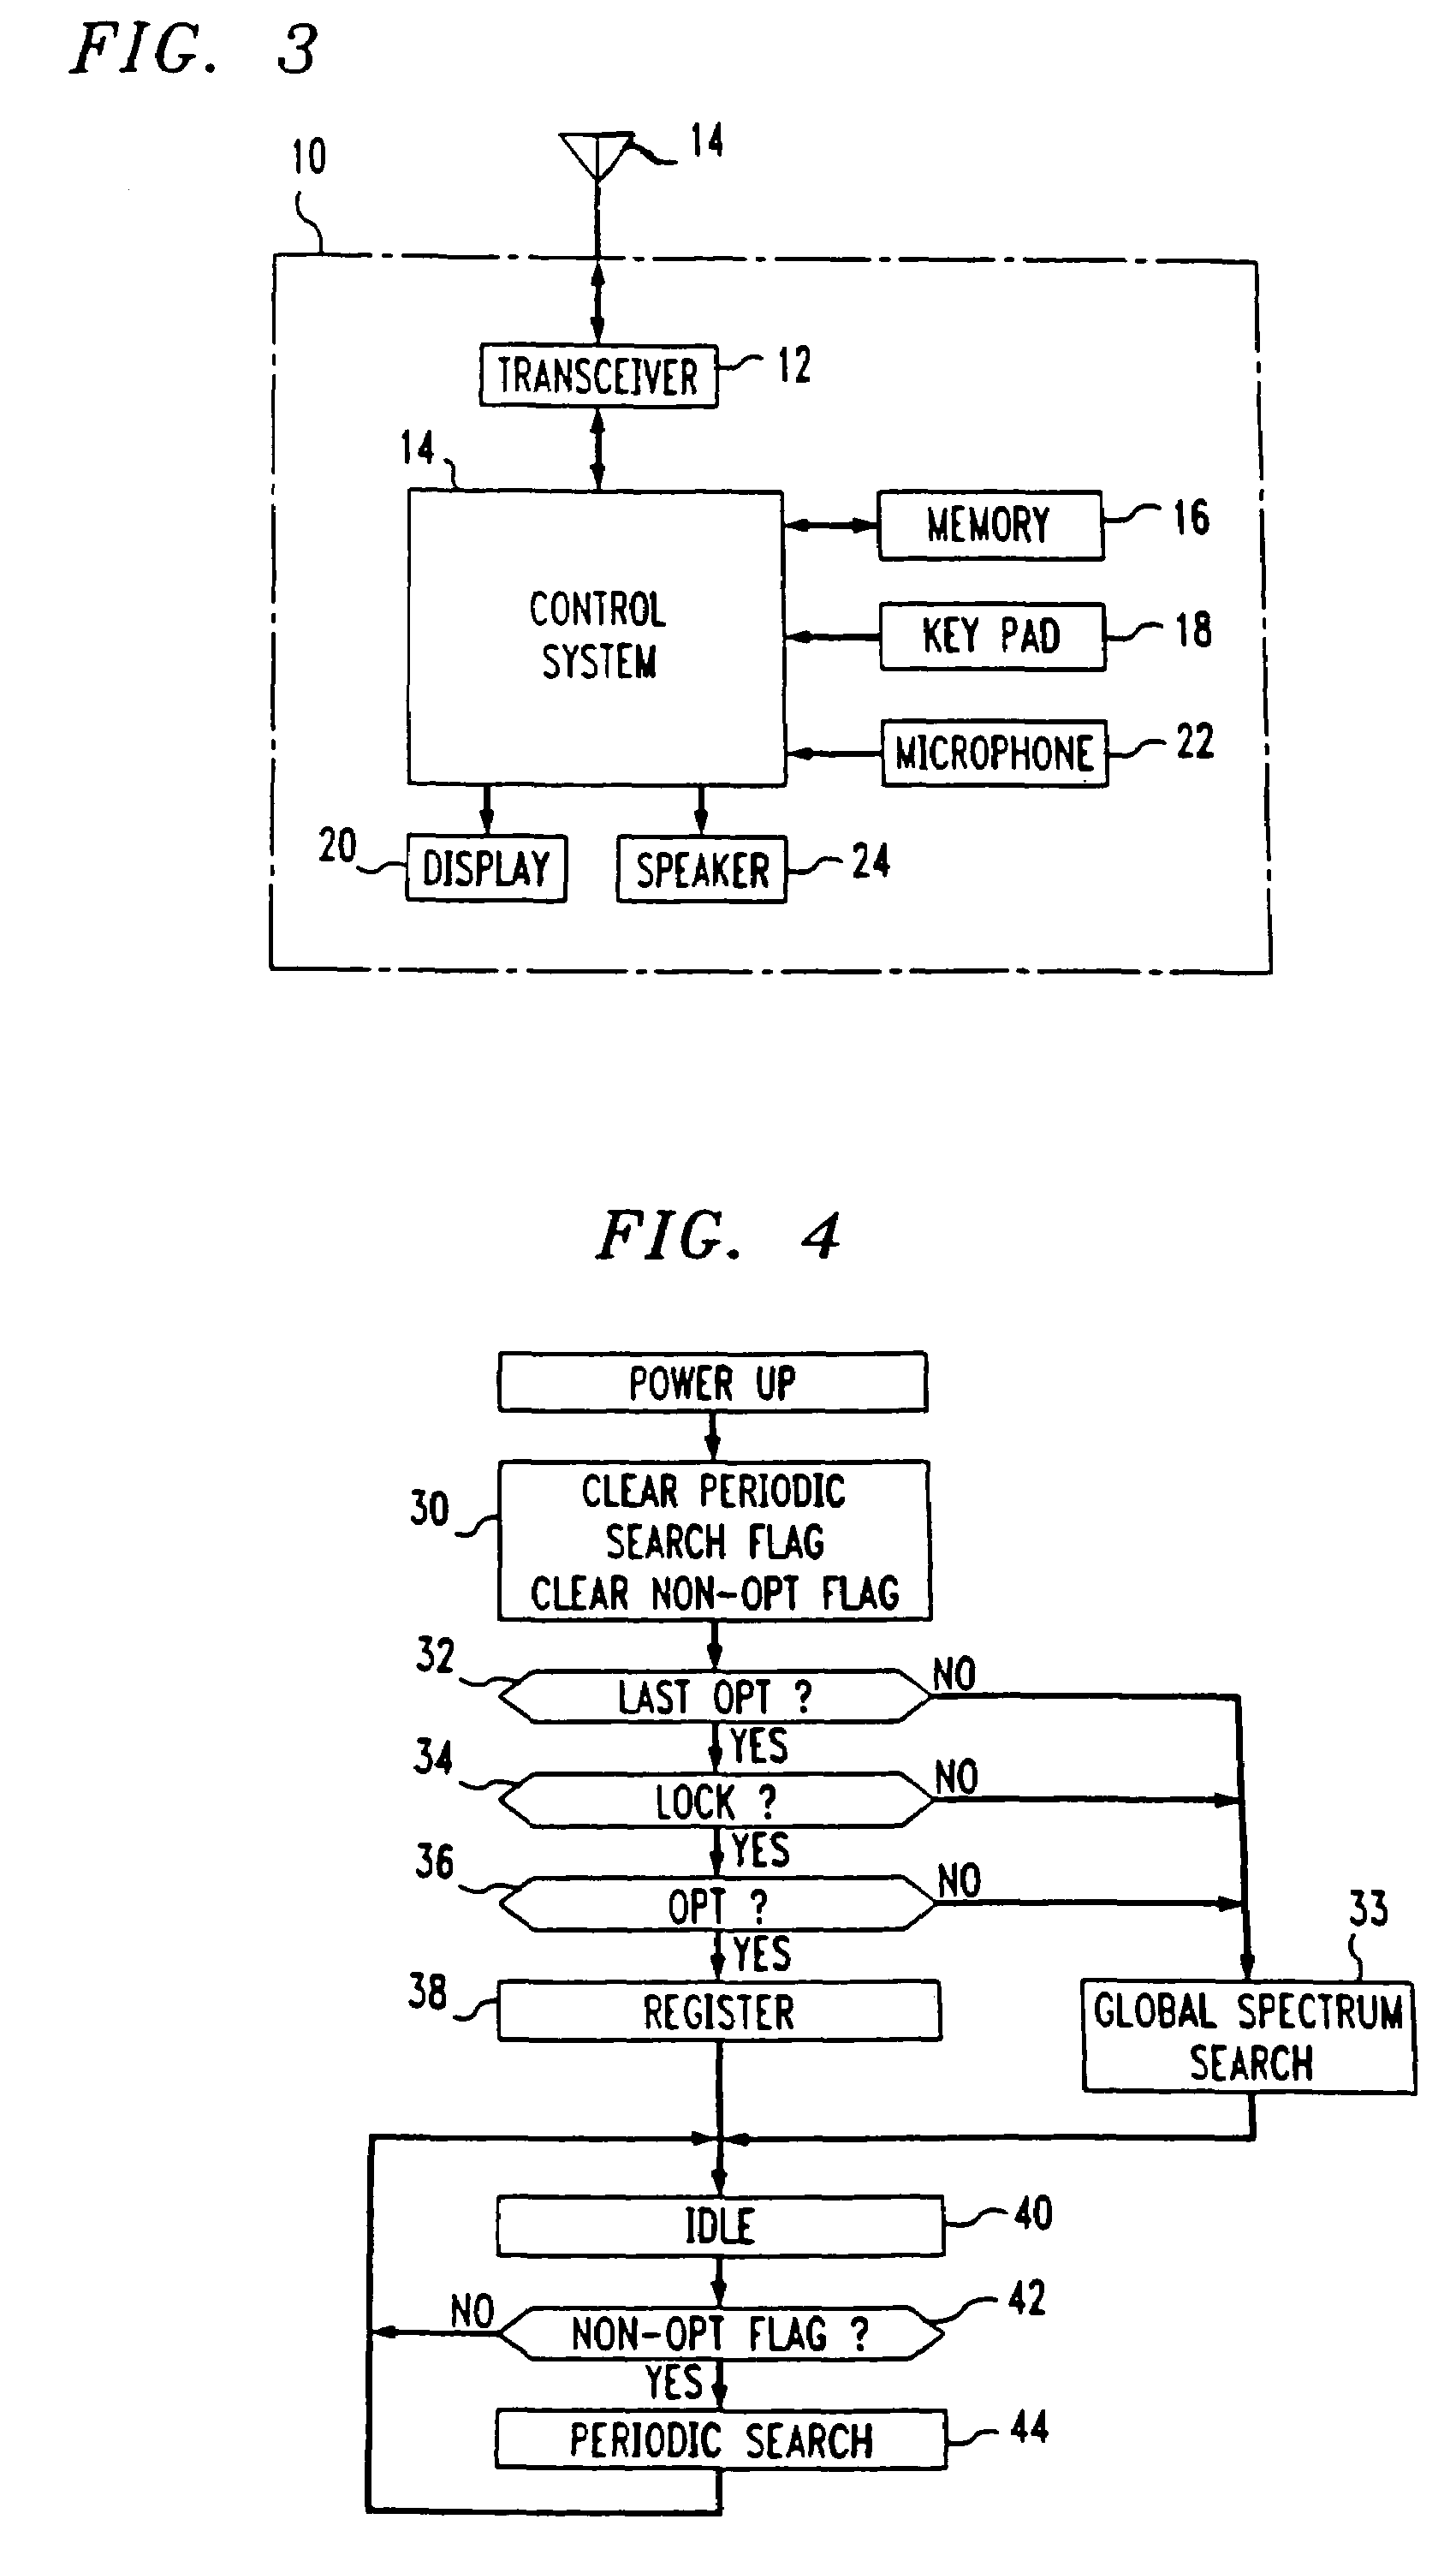 Method for selecting a wireless communication service provider in a multi-service provider environment